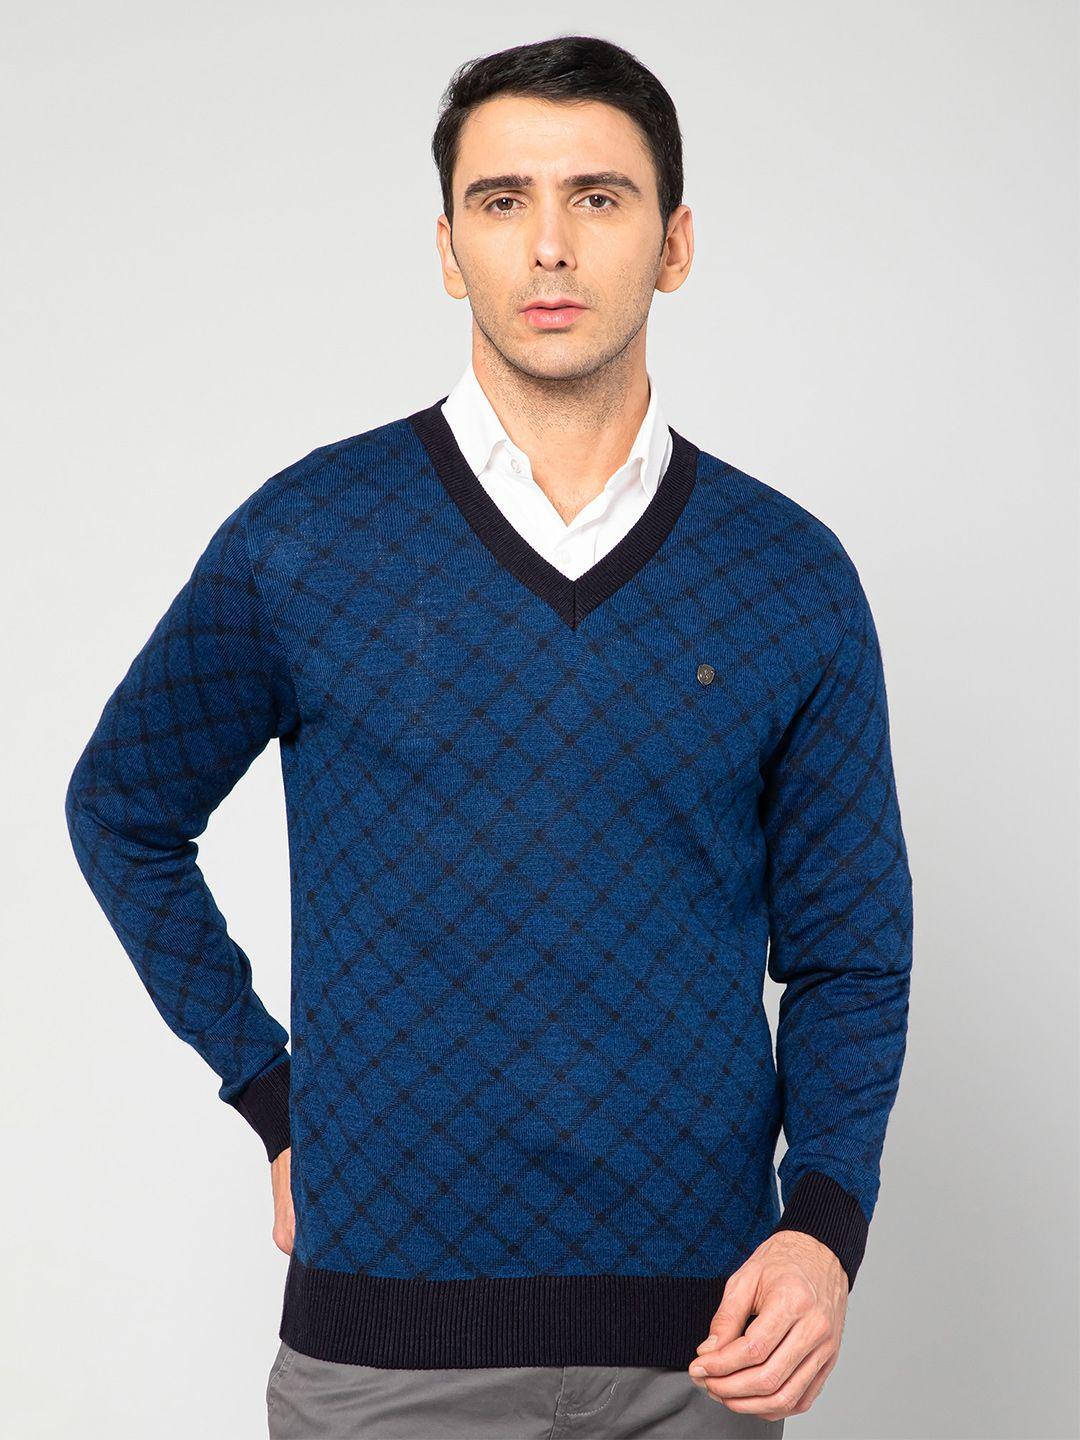 cantabil men blue & black printed acrylic pullover sweater